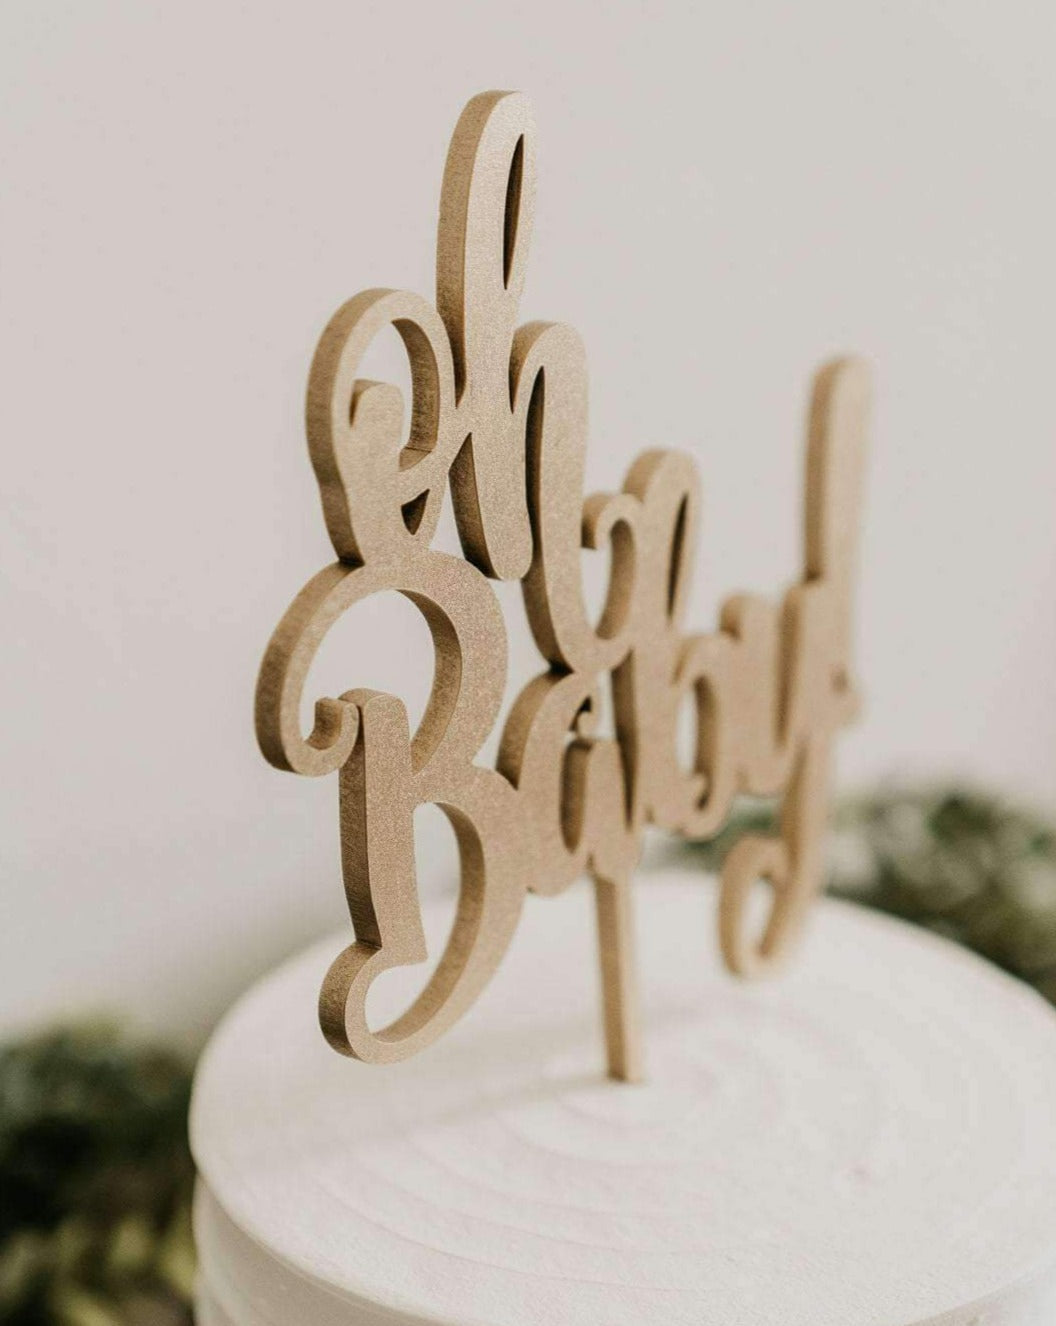 Oh Baby Cake Topper